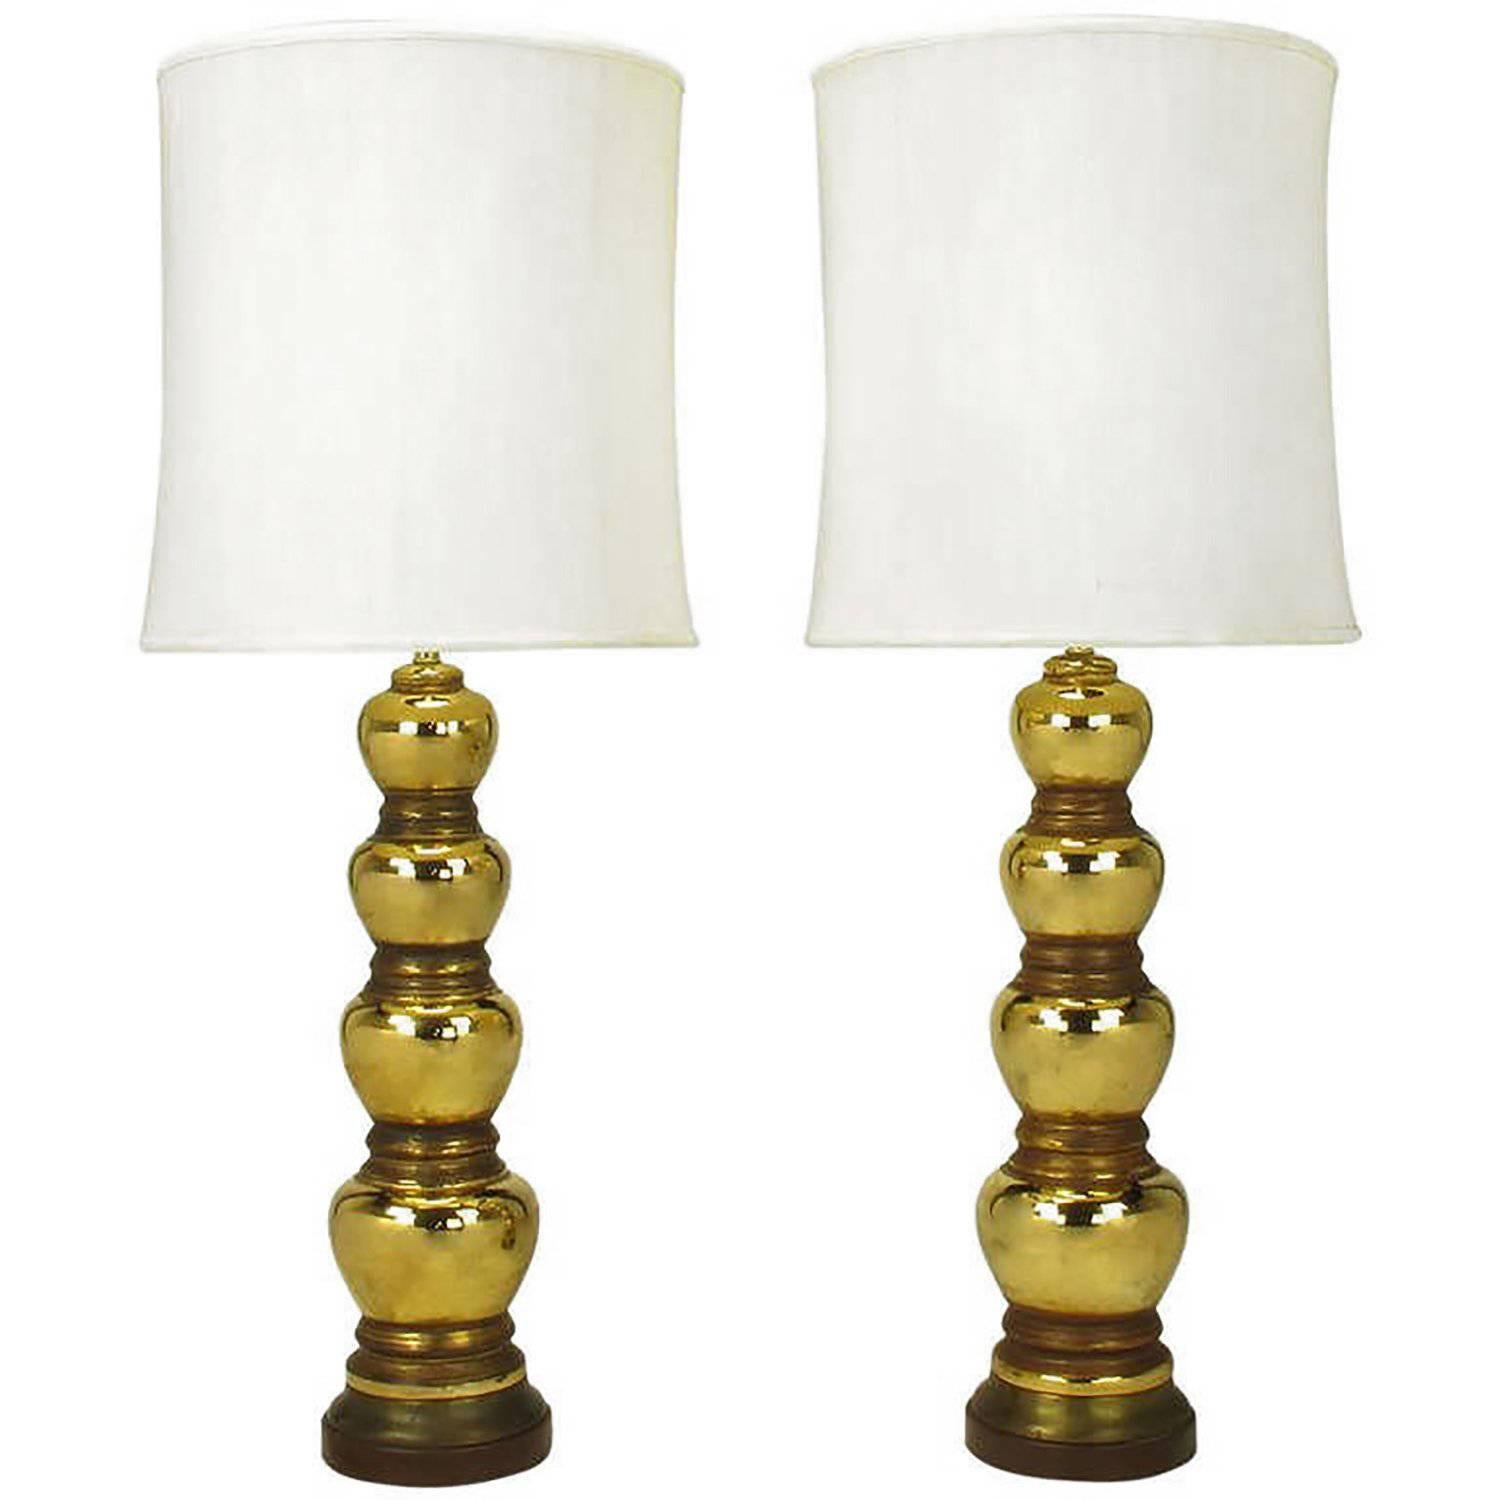 Pair of 1930s Gold-Plated Mirror Glazed Porcelain Quadruple Gourd Table Lamps